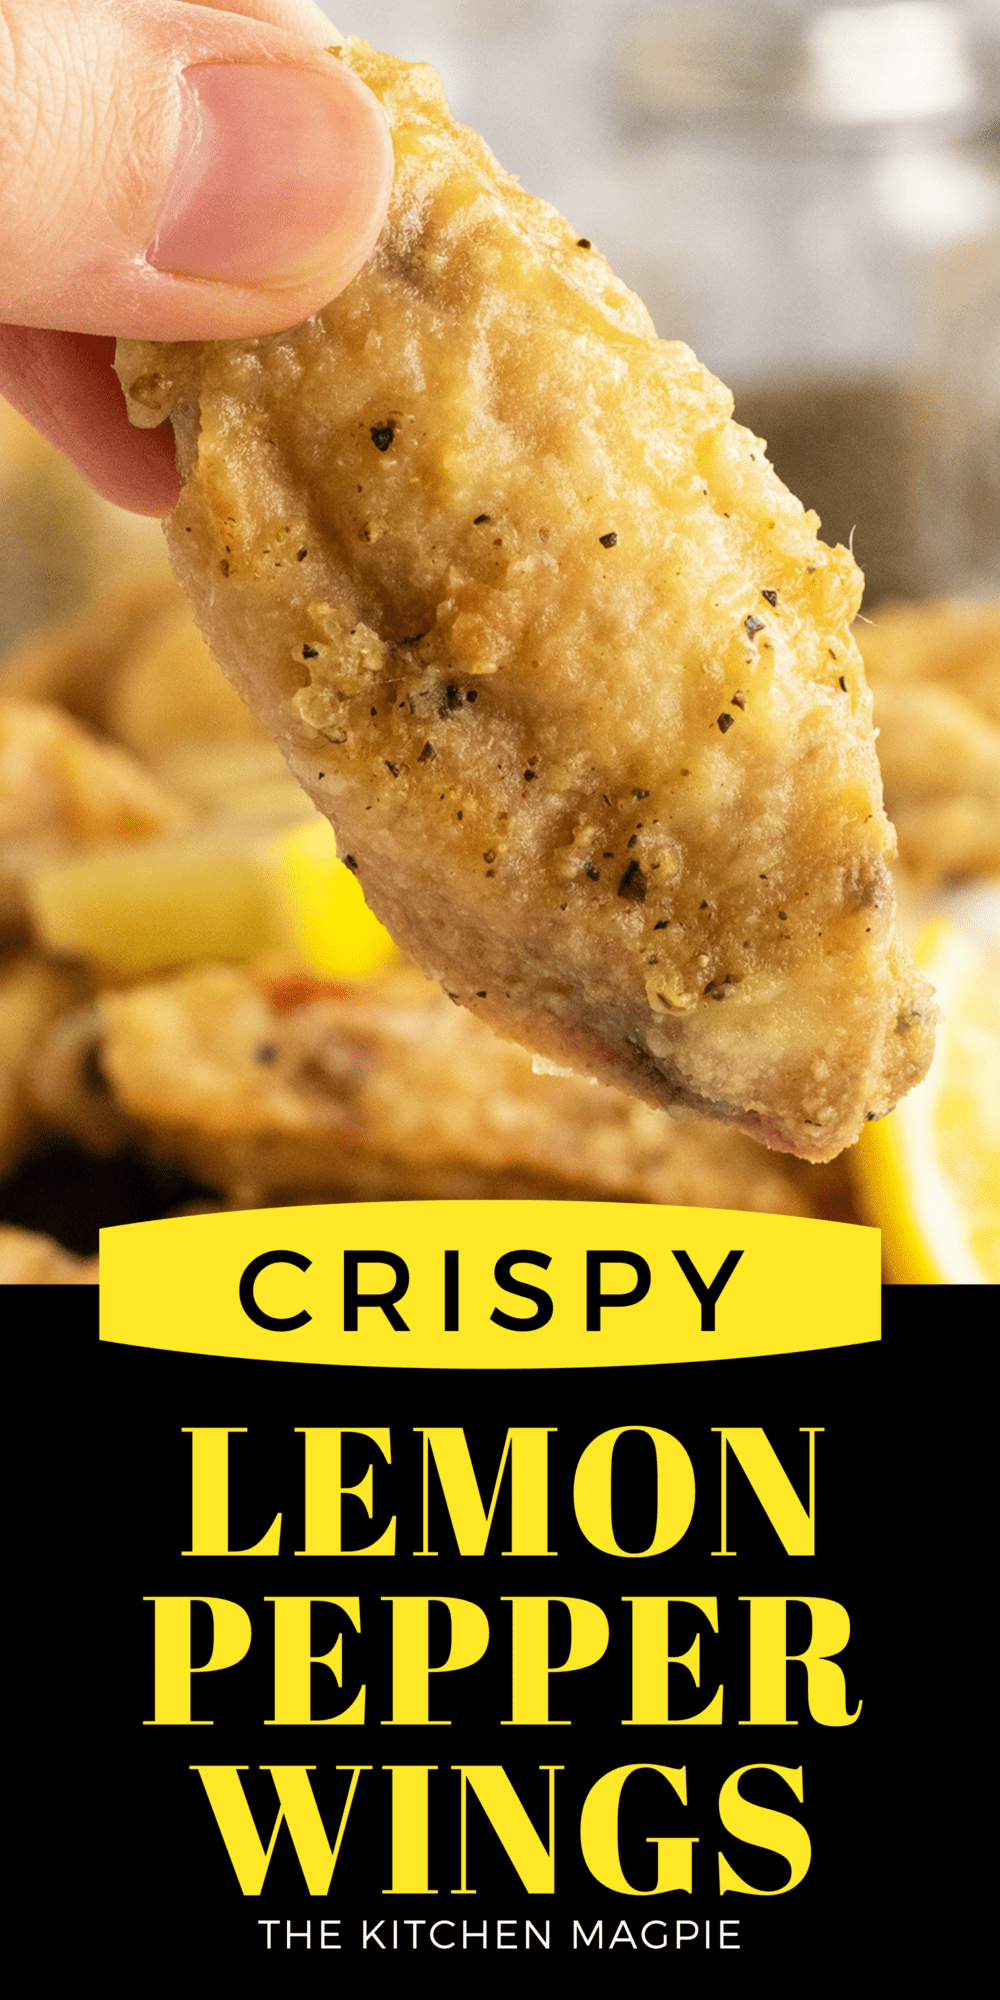 Lemon pepper wings have this amazing combination of acidic, salty, tangy, and intense that makes for a uniquely potent wing flavor.